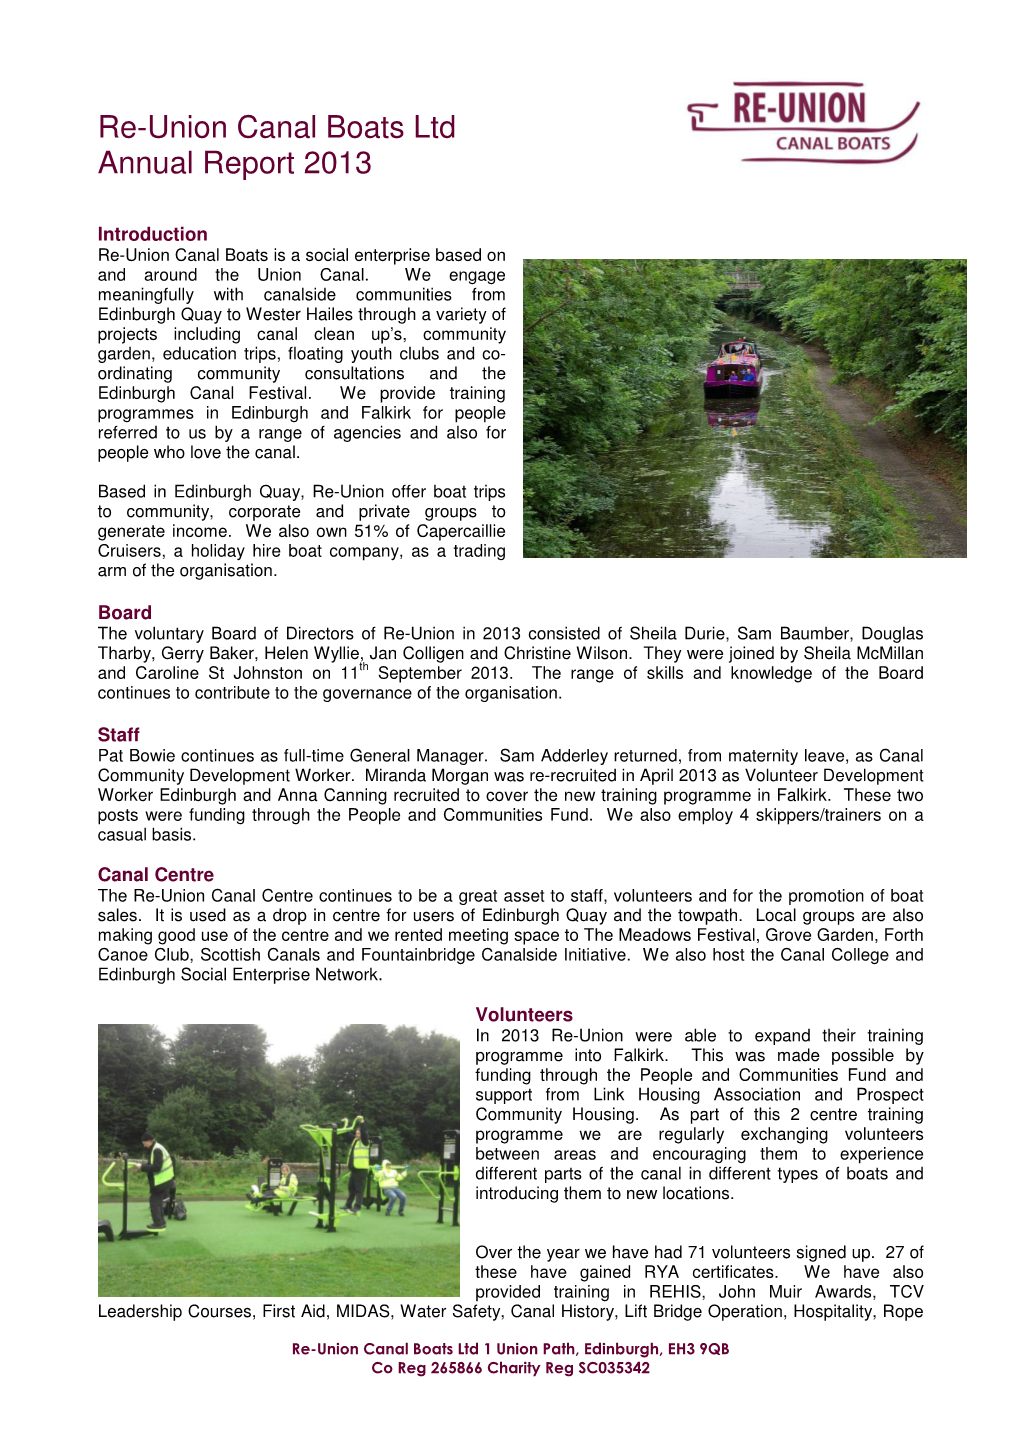 Re-Union Canal Boats Ltd Annual Report 2013